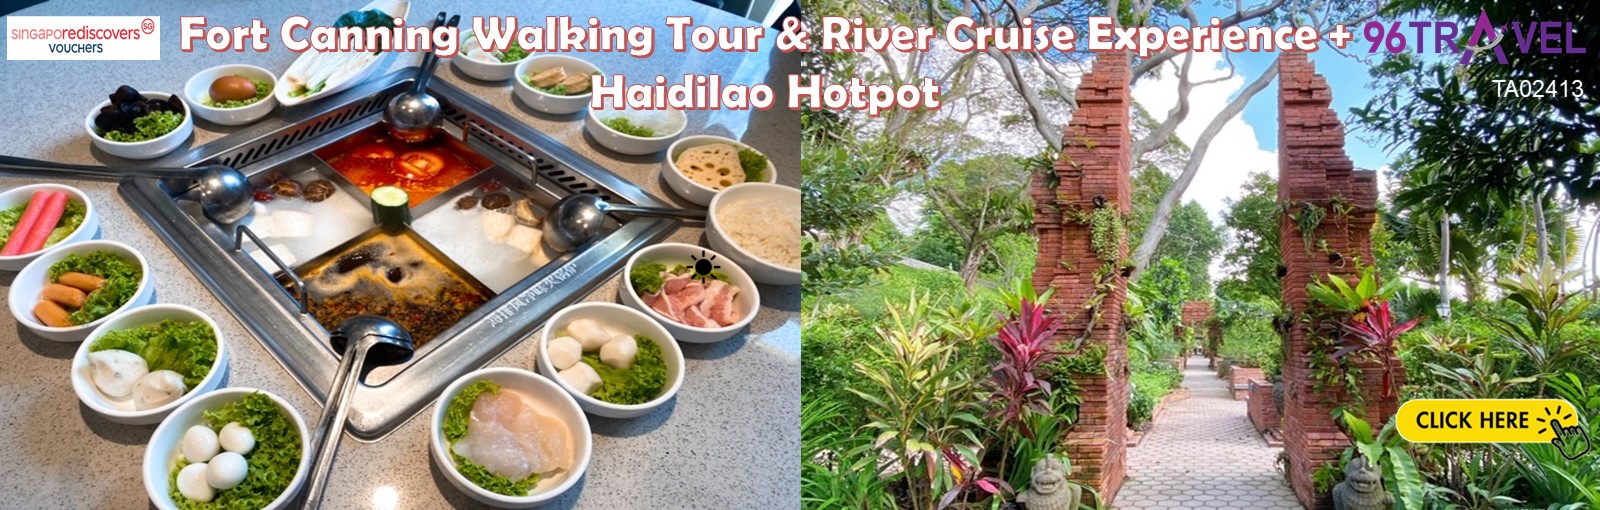 https://www.klook.com/en-SG/activity/55752-fort-canning-walking-tour-river-cruise-experience-haidilao-hot-pot/